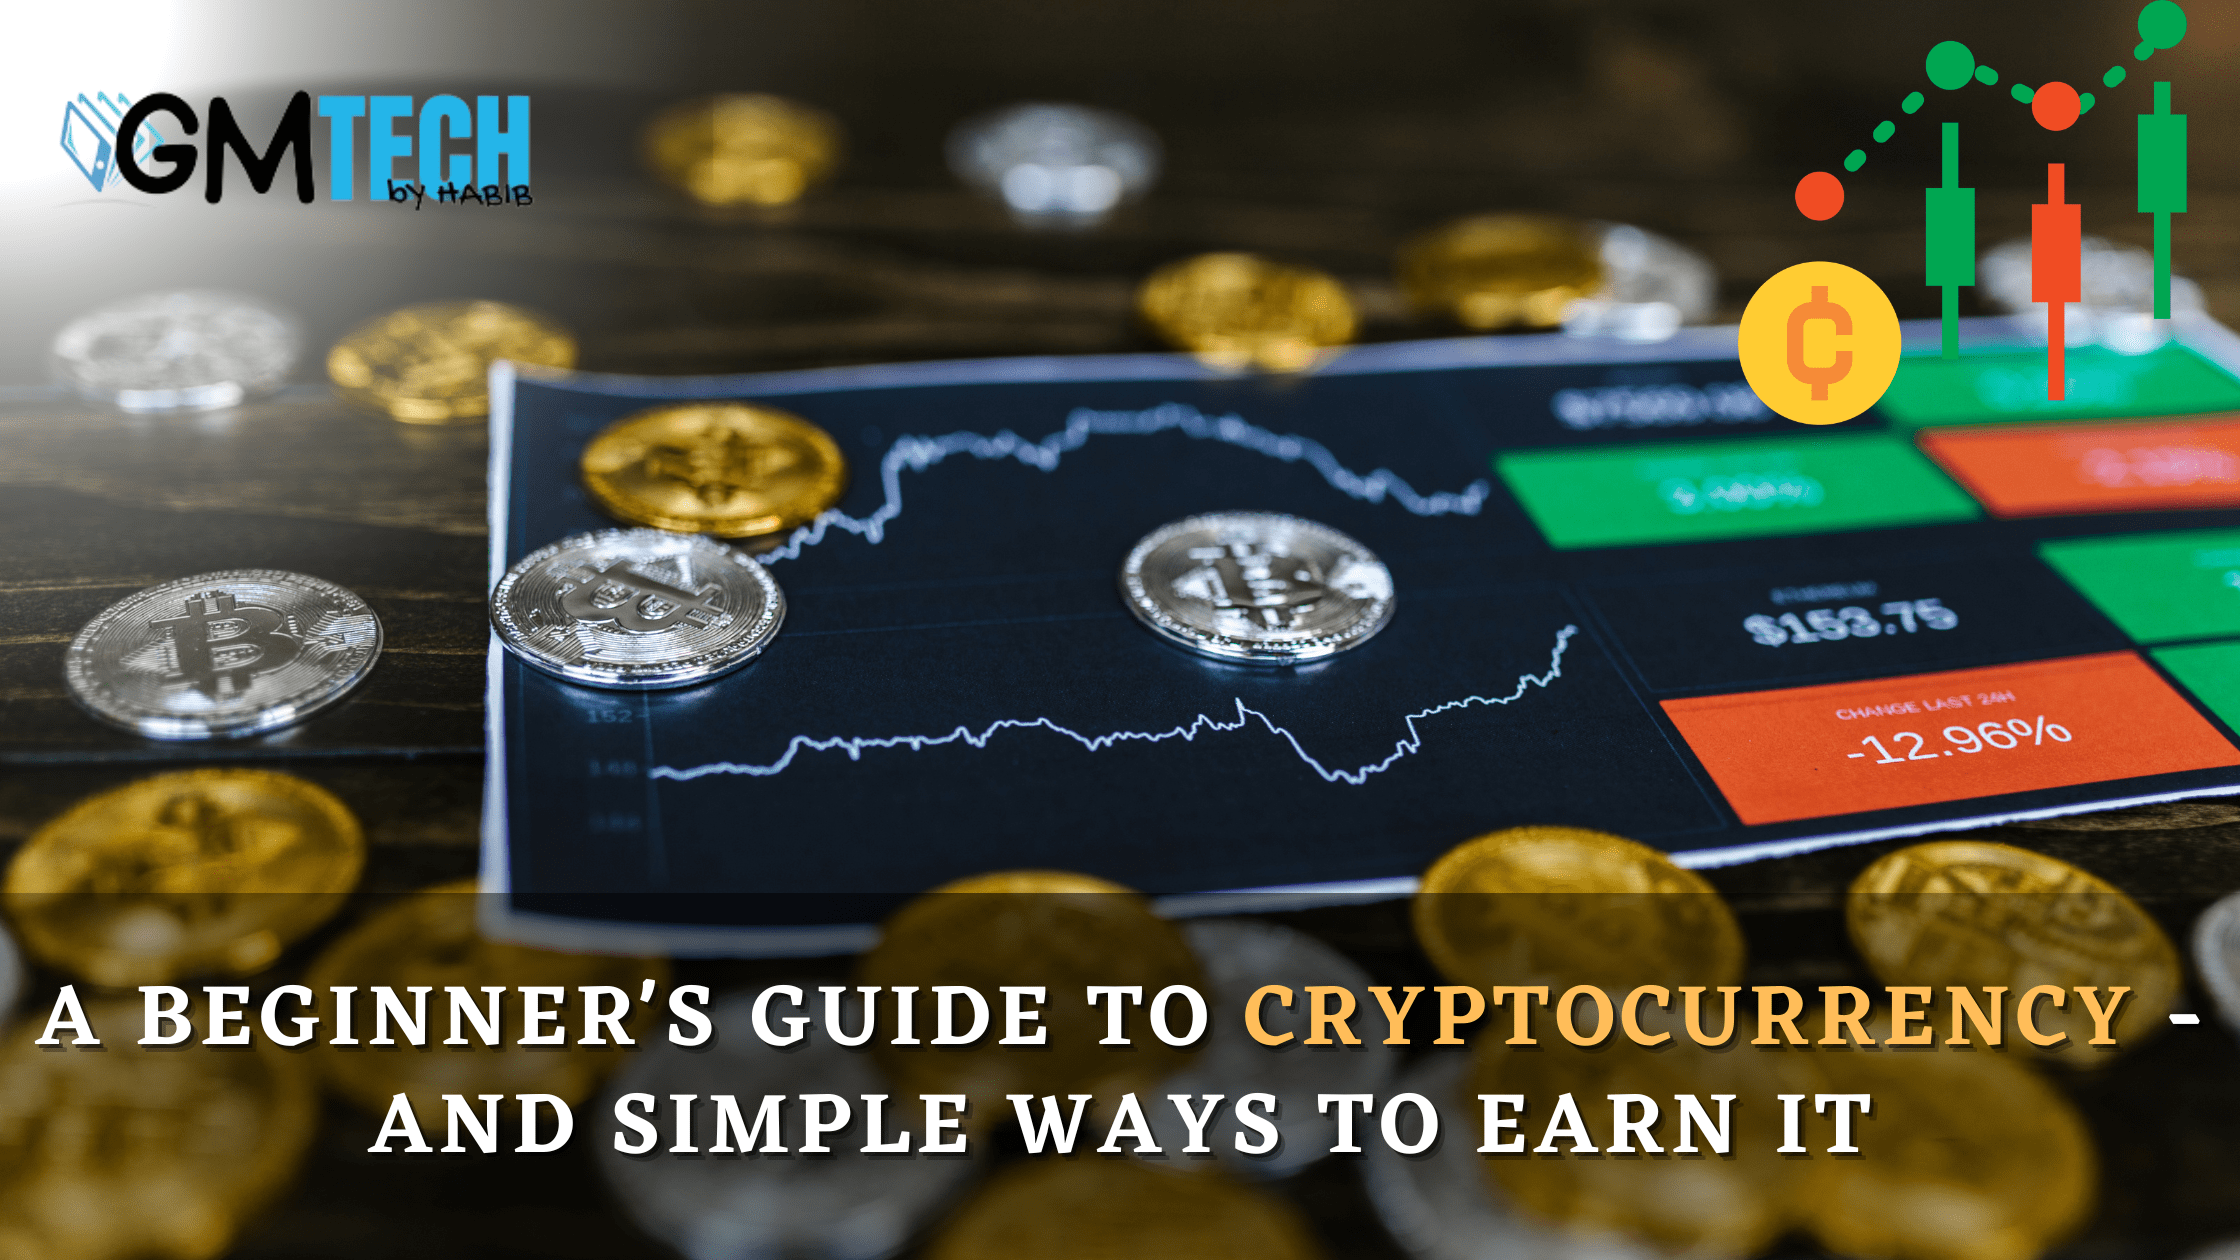 A Beginner's Guide To CryptoCurrency - And Simple Ways to Earn It